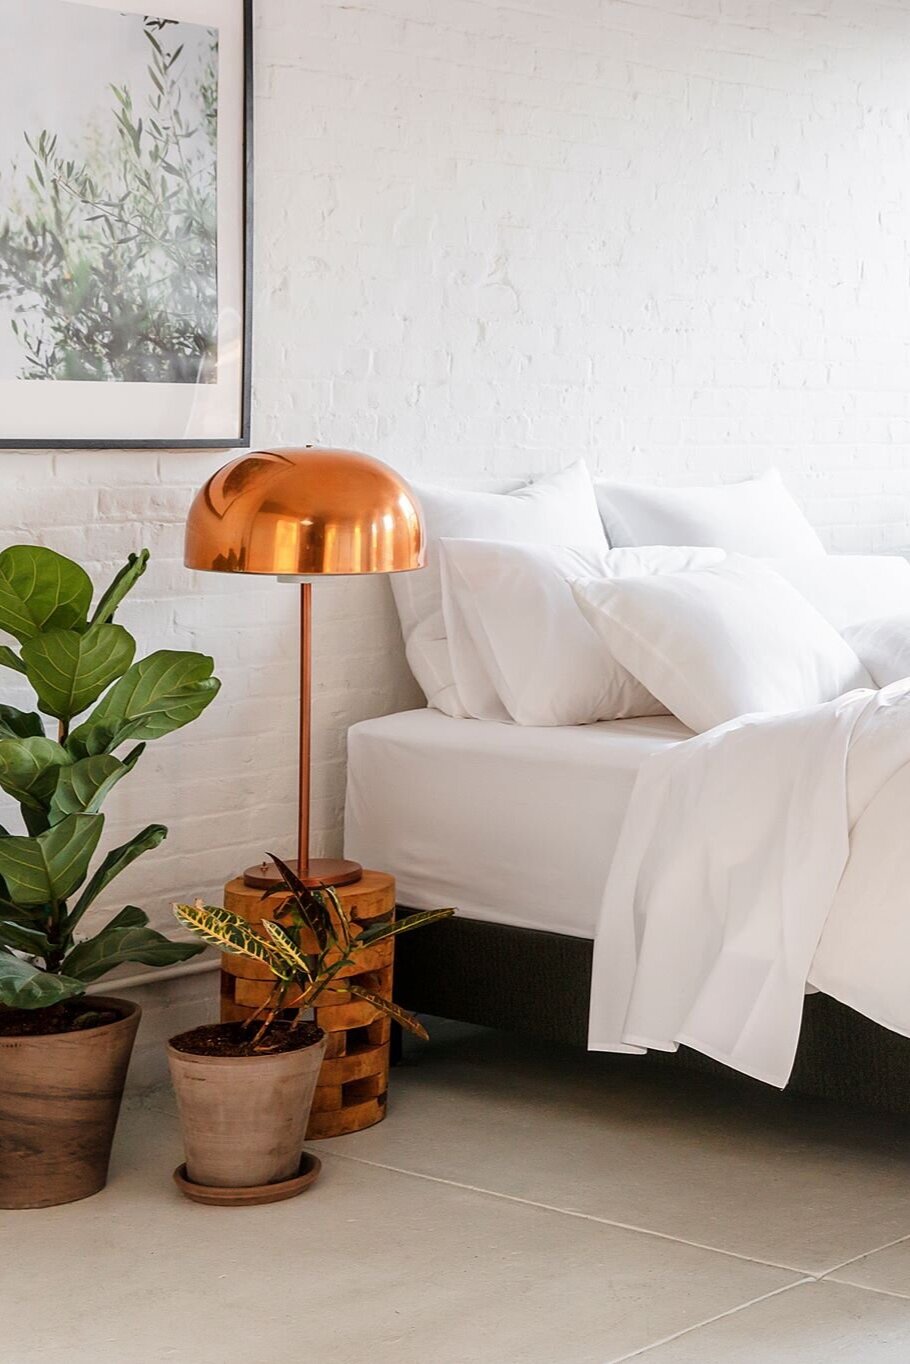 14 Non-Toxic, Organic Mattresses From Affordable to Luxury